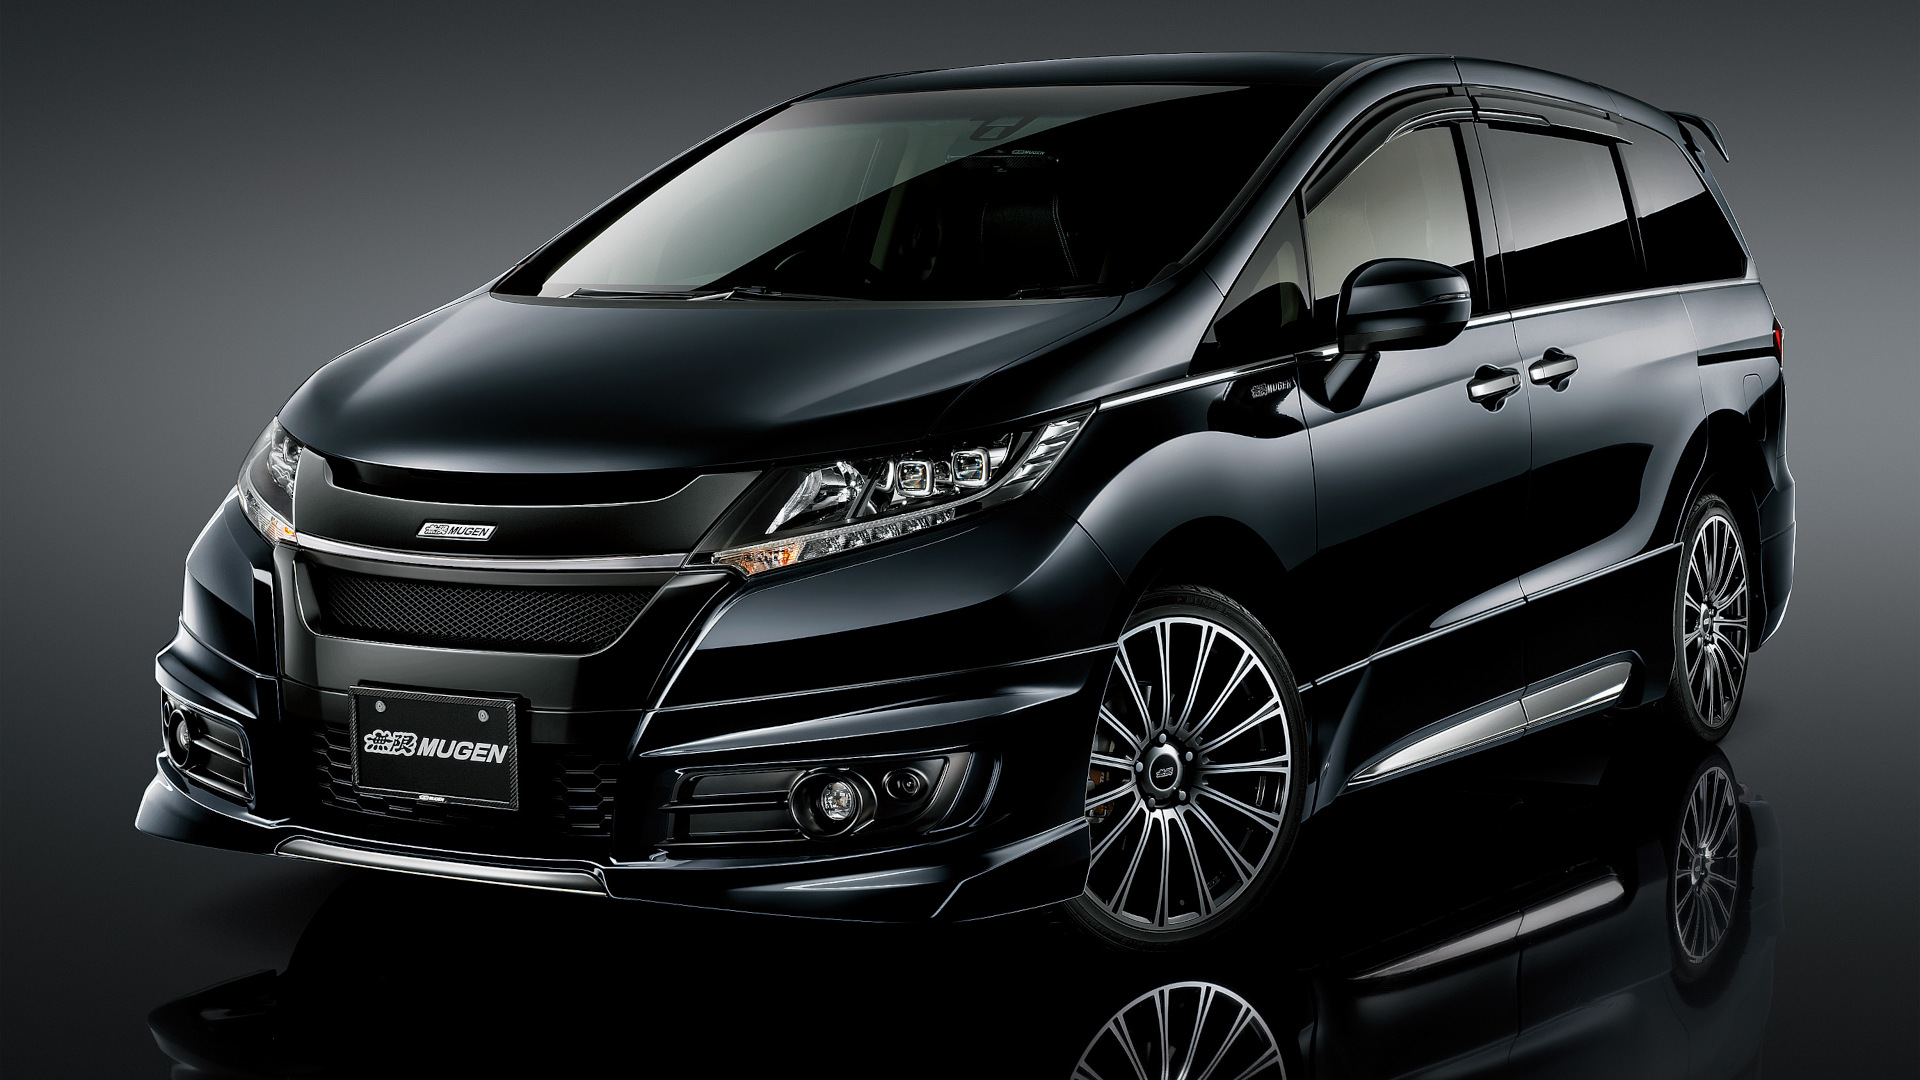 Mugen parts are now available for the Honda Odyssey in Japan Honda Mugen